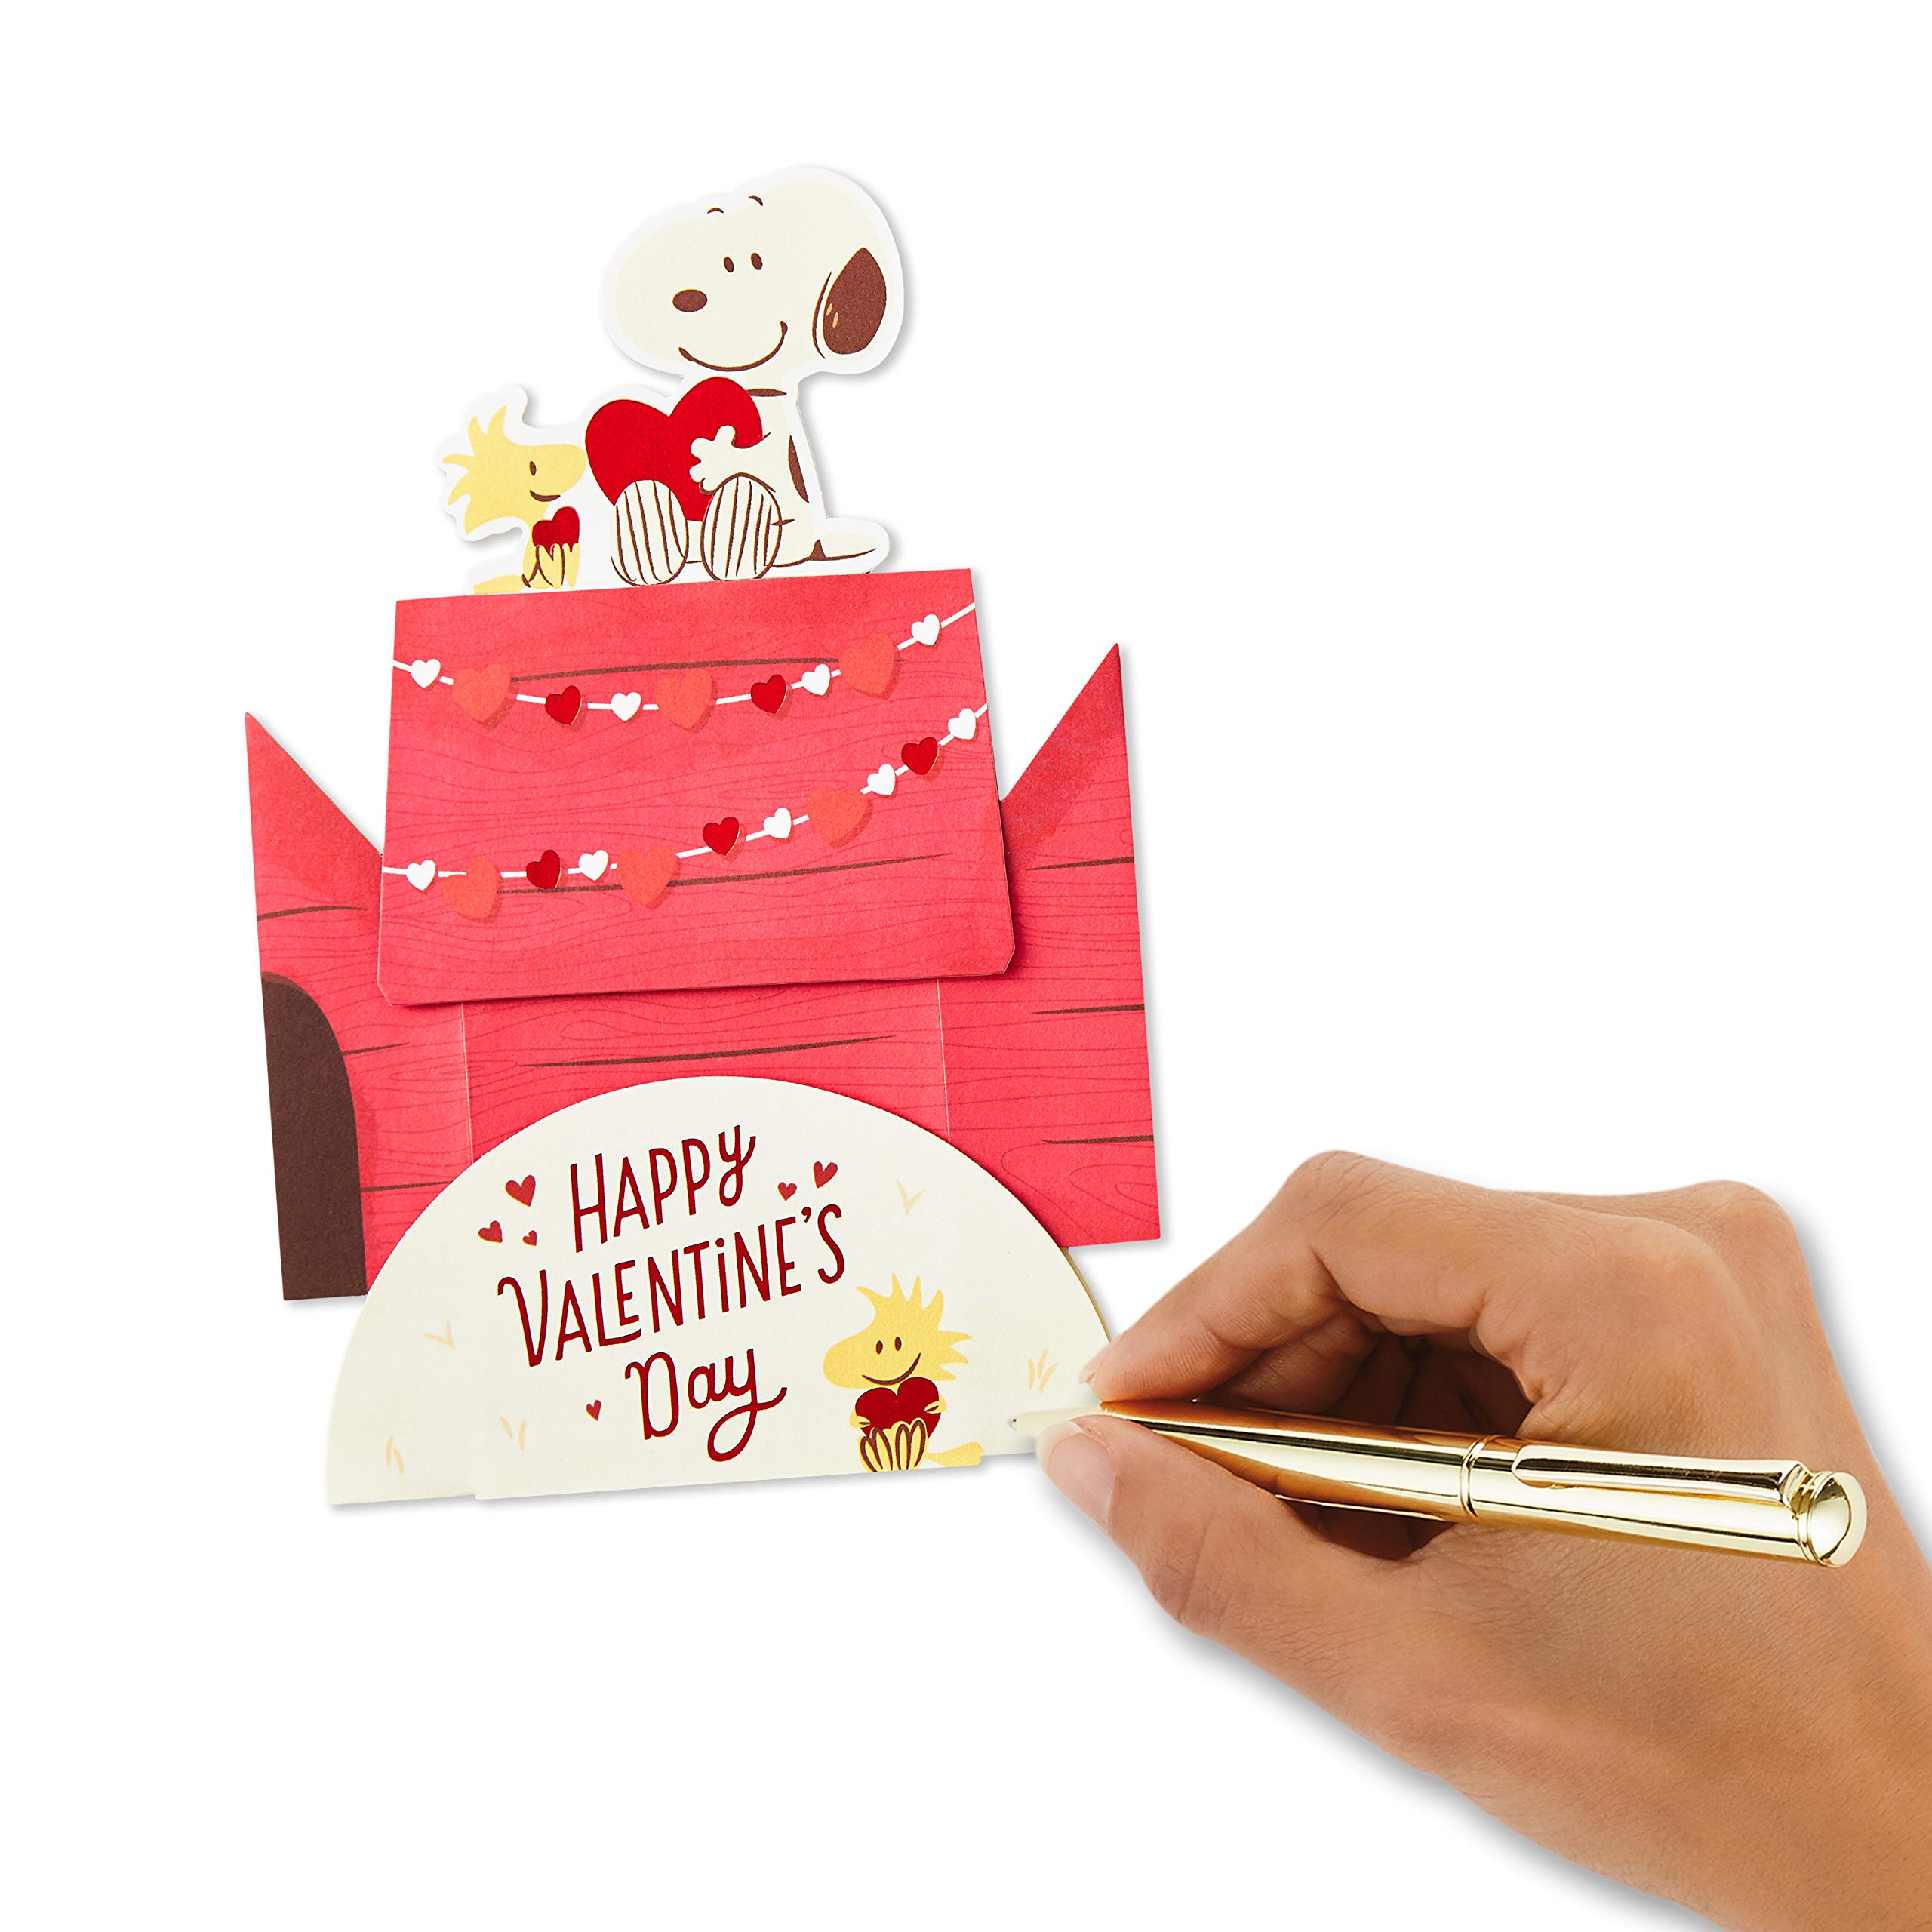 Hallmark Paper Wonder Peanuts Pop Up Valentines Day Card (Snoopy and Woodstock)